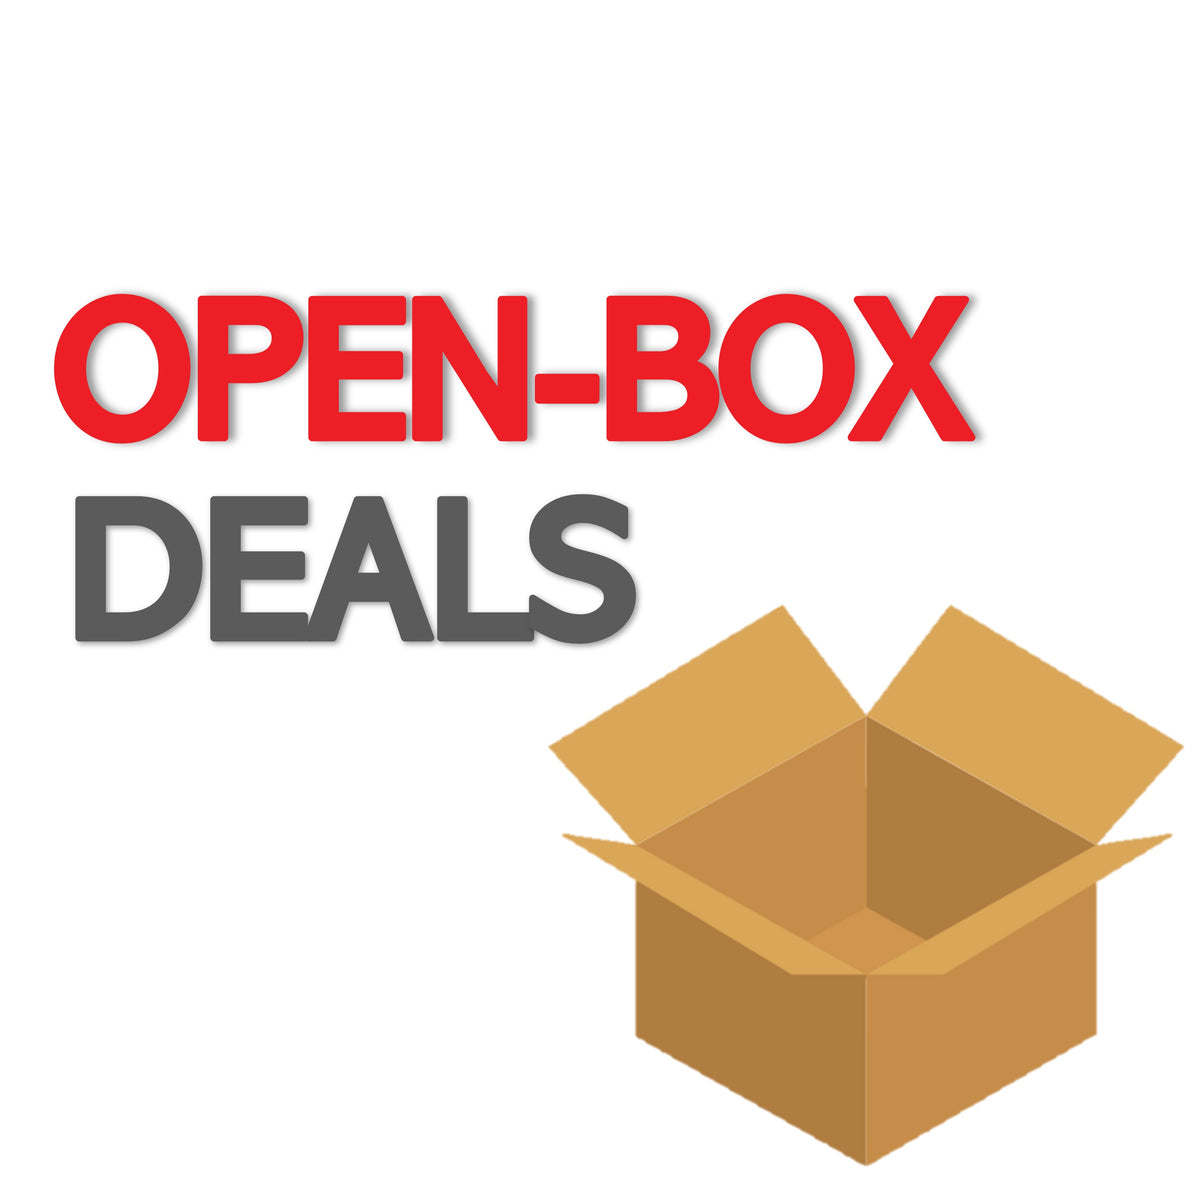 Featured Products: Discounted, Open-Box, Clearance, and Special